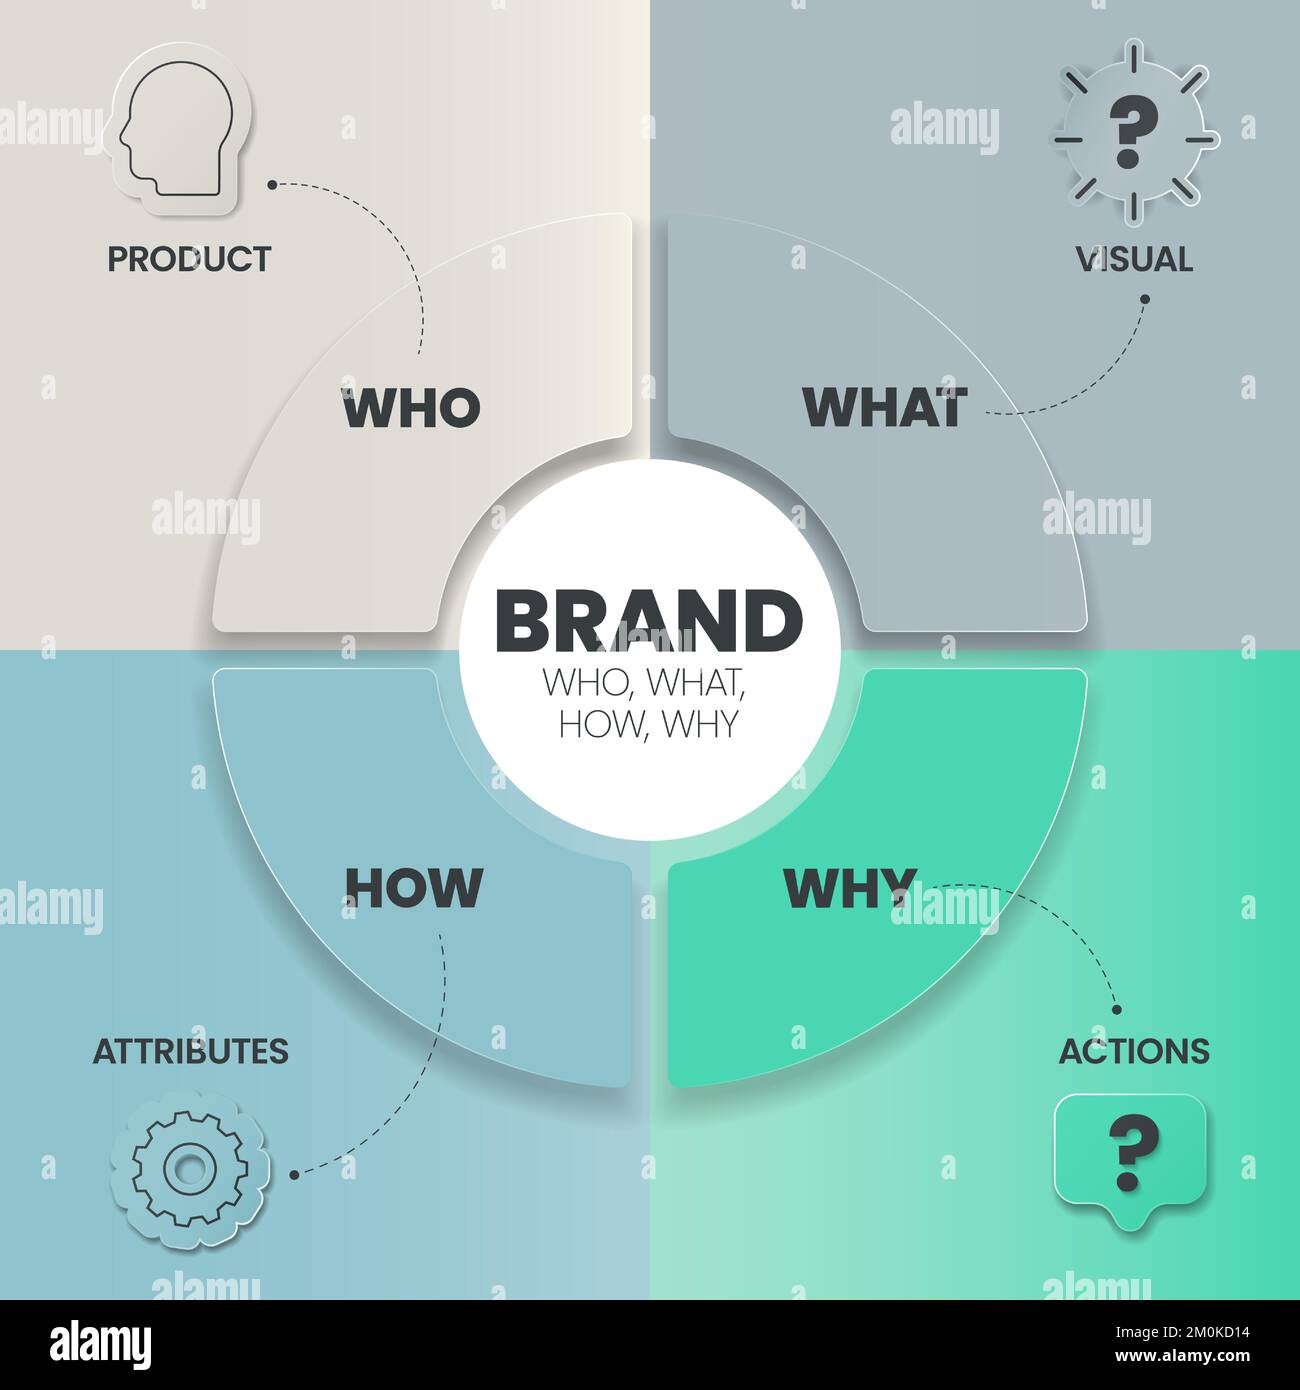 Brand Strategy (Who, What, How, Why) infographic presentation